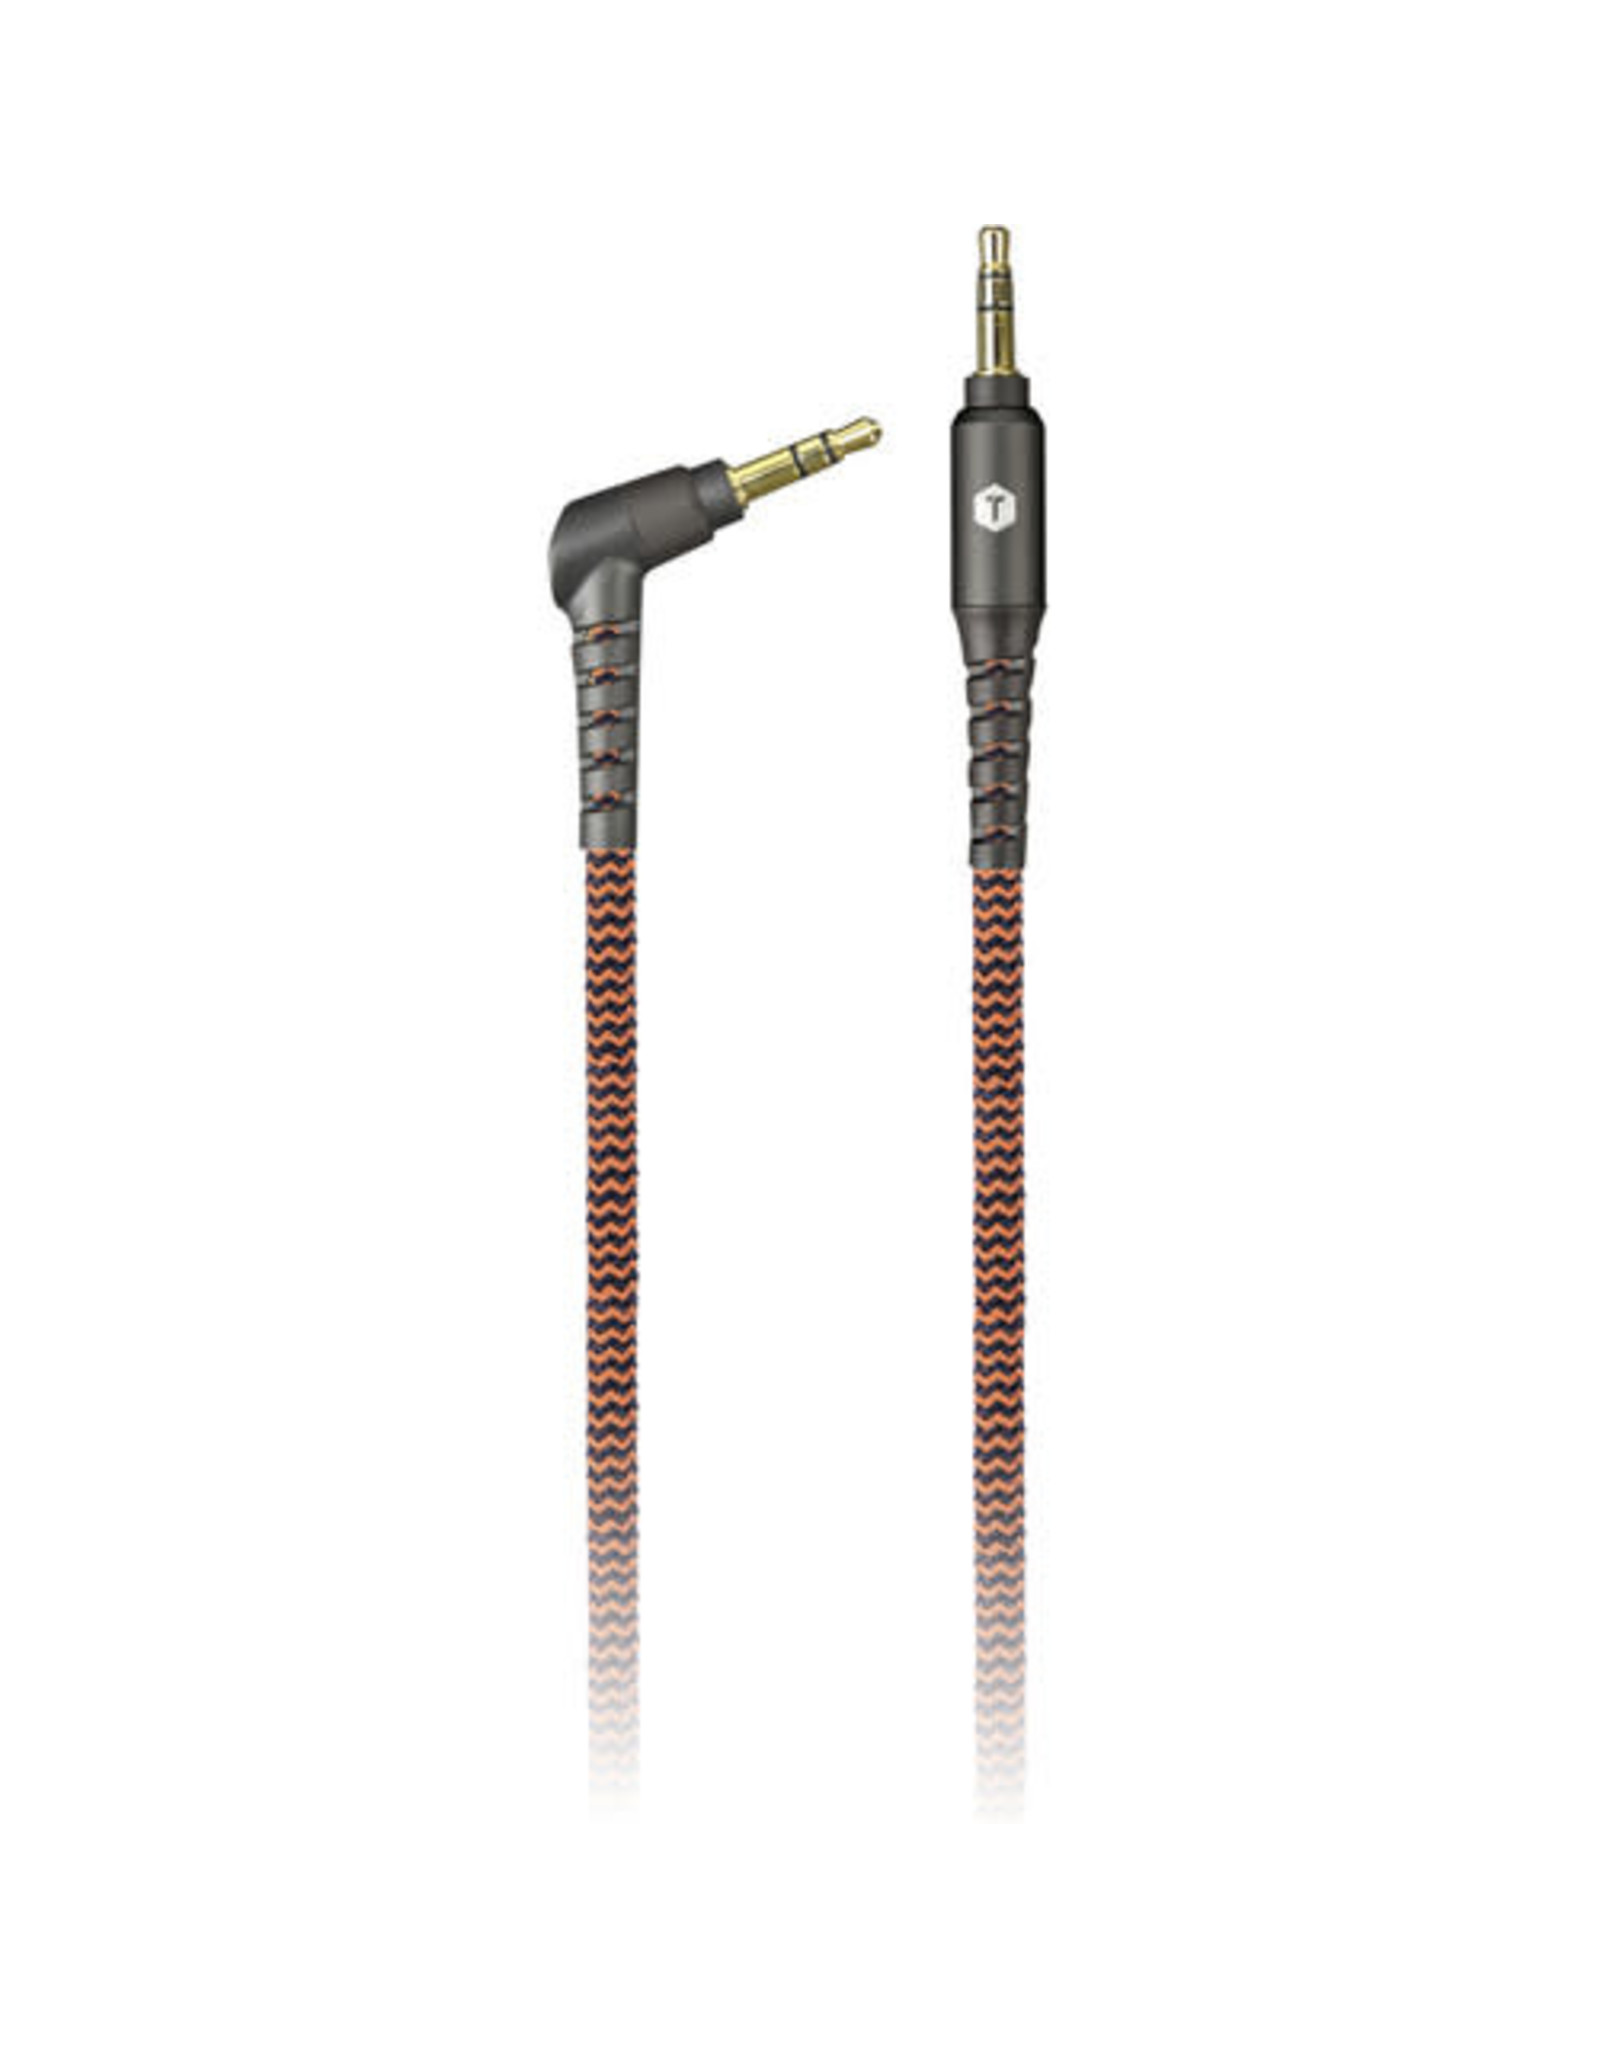 Digipower Cable - Tough  Tested 6ft Braided Stereo Audio 3.5mm